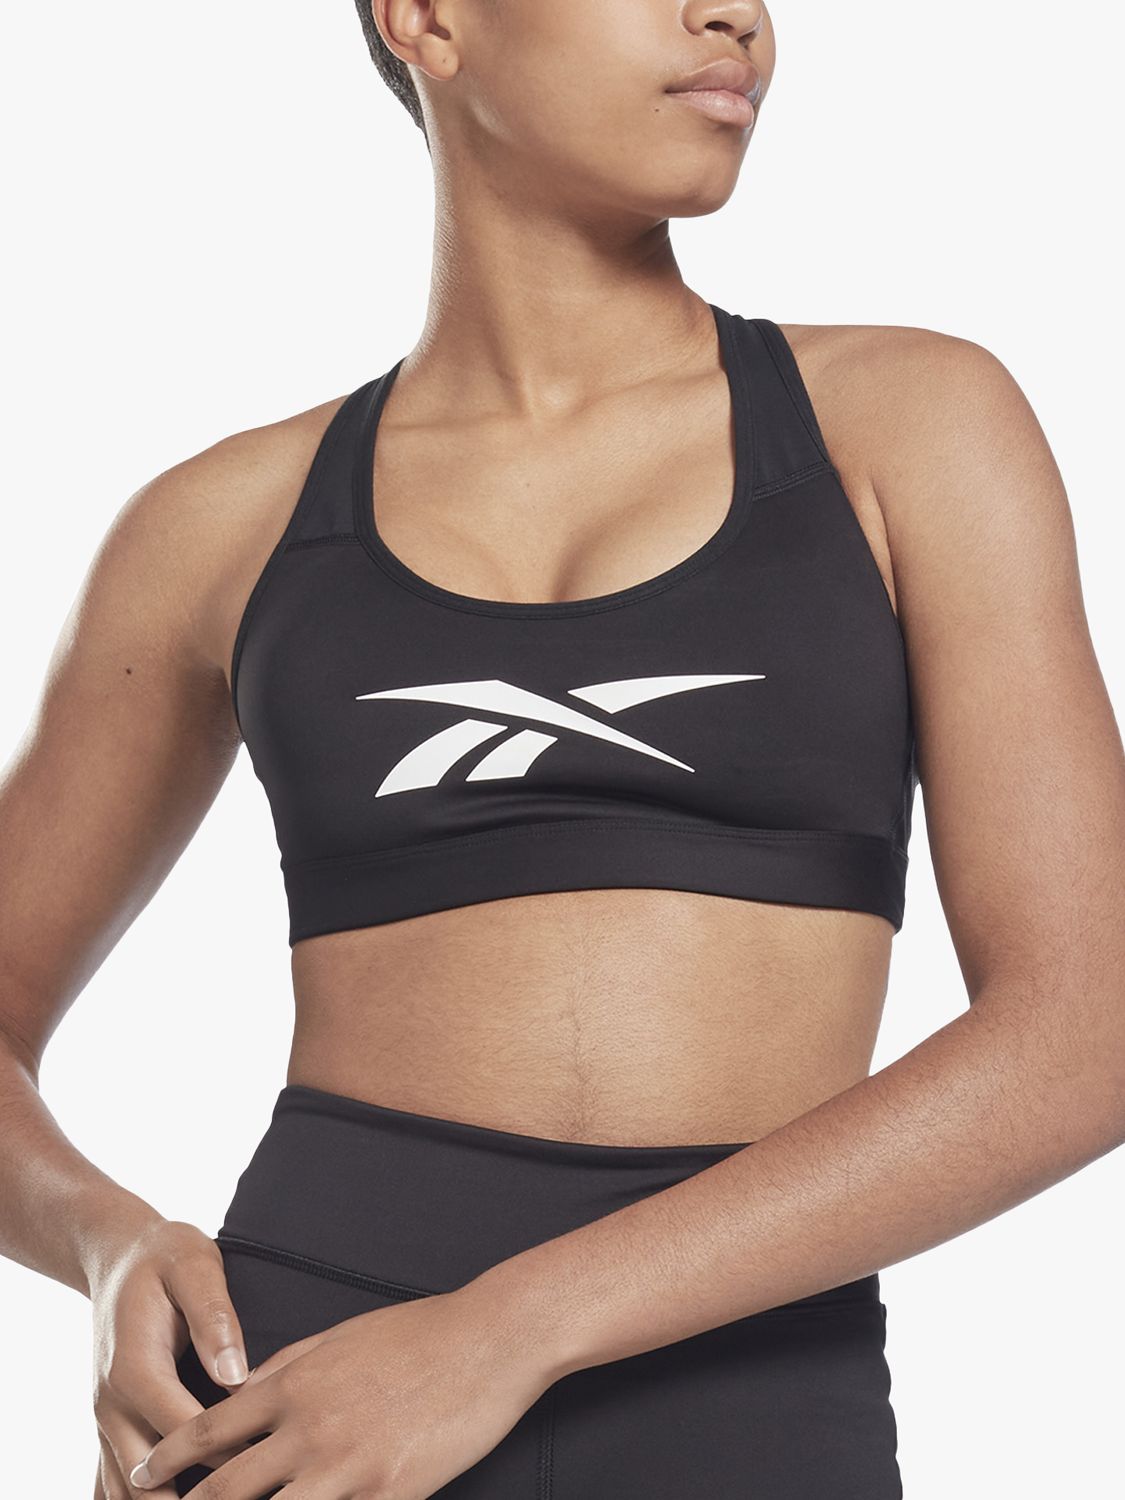 Triumph - Elevate your fitness journey with sports bras